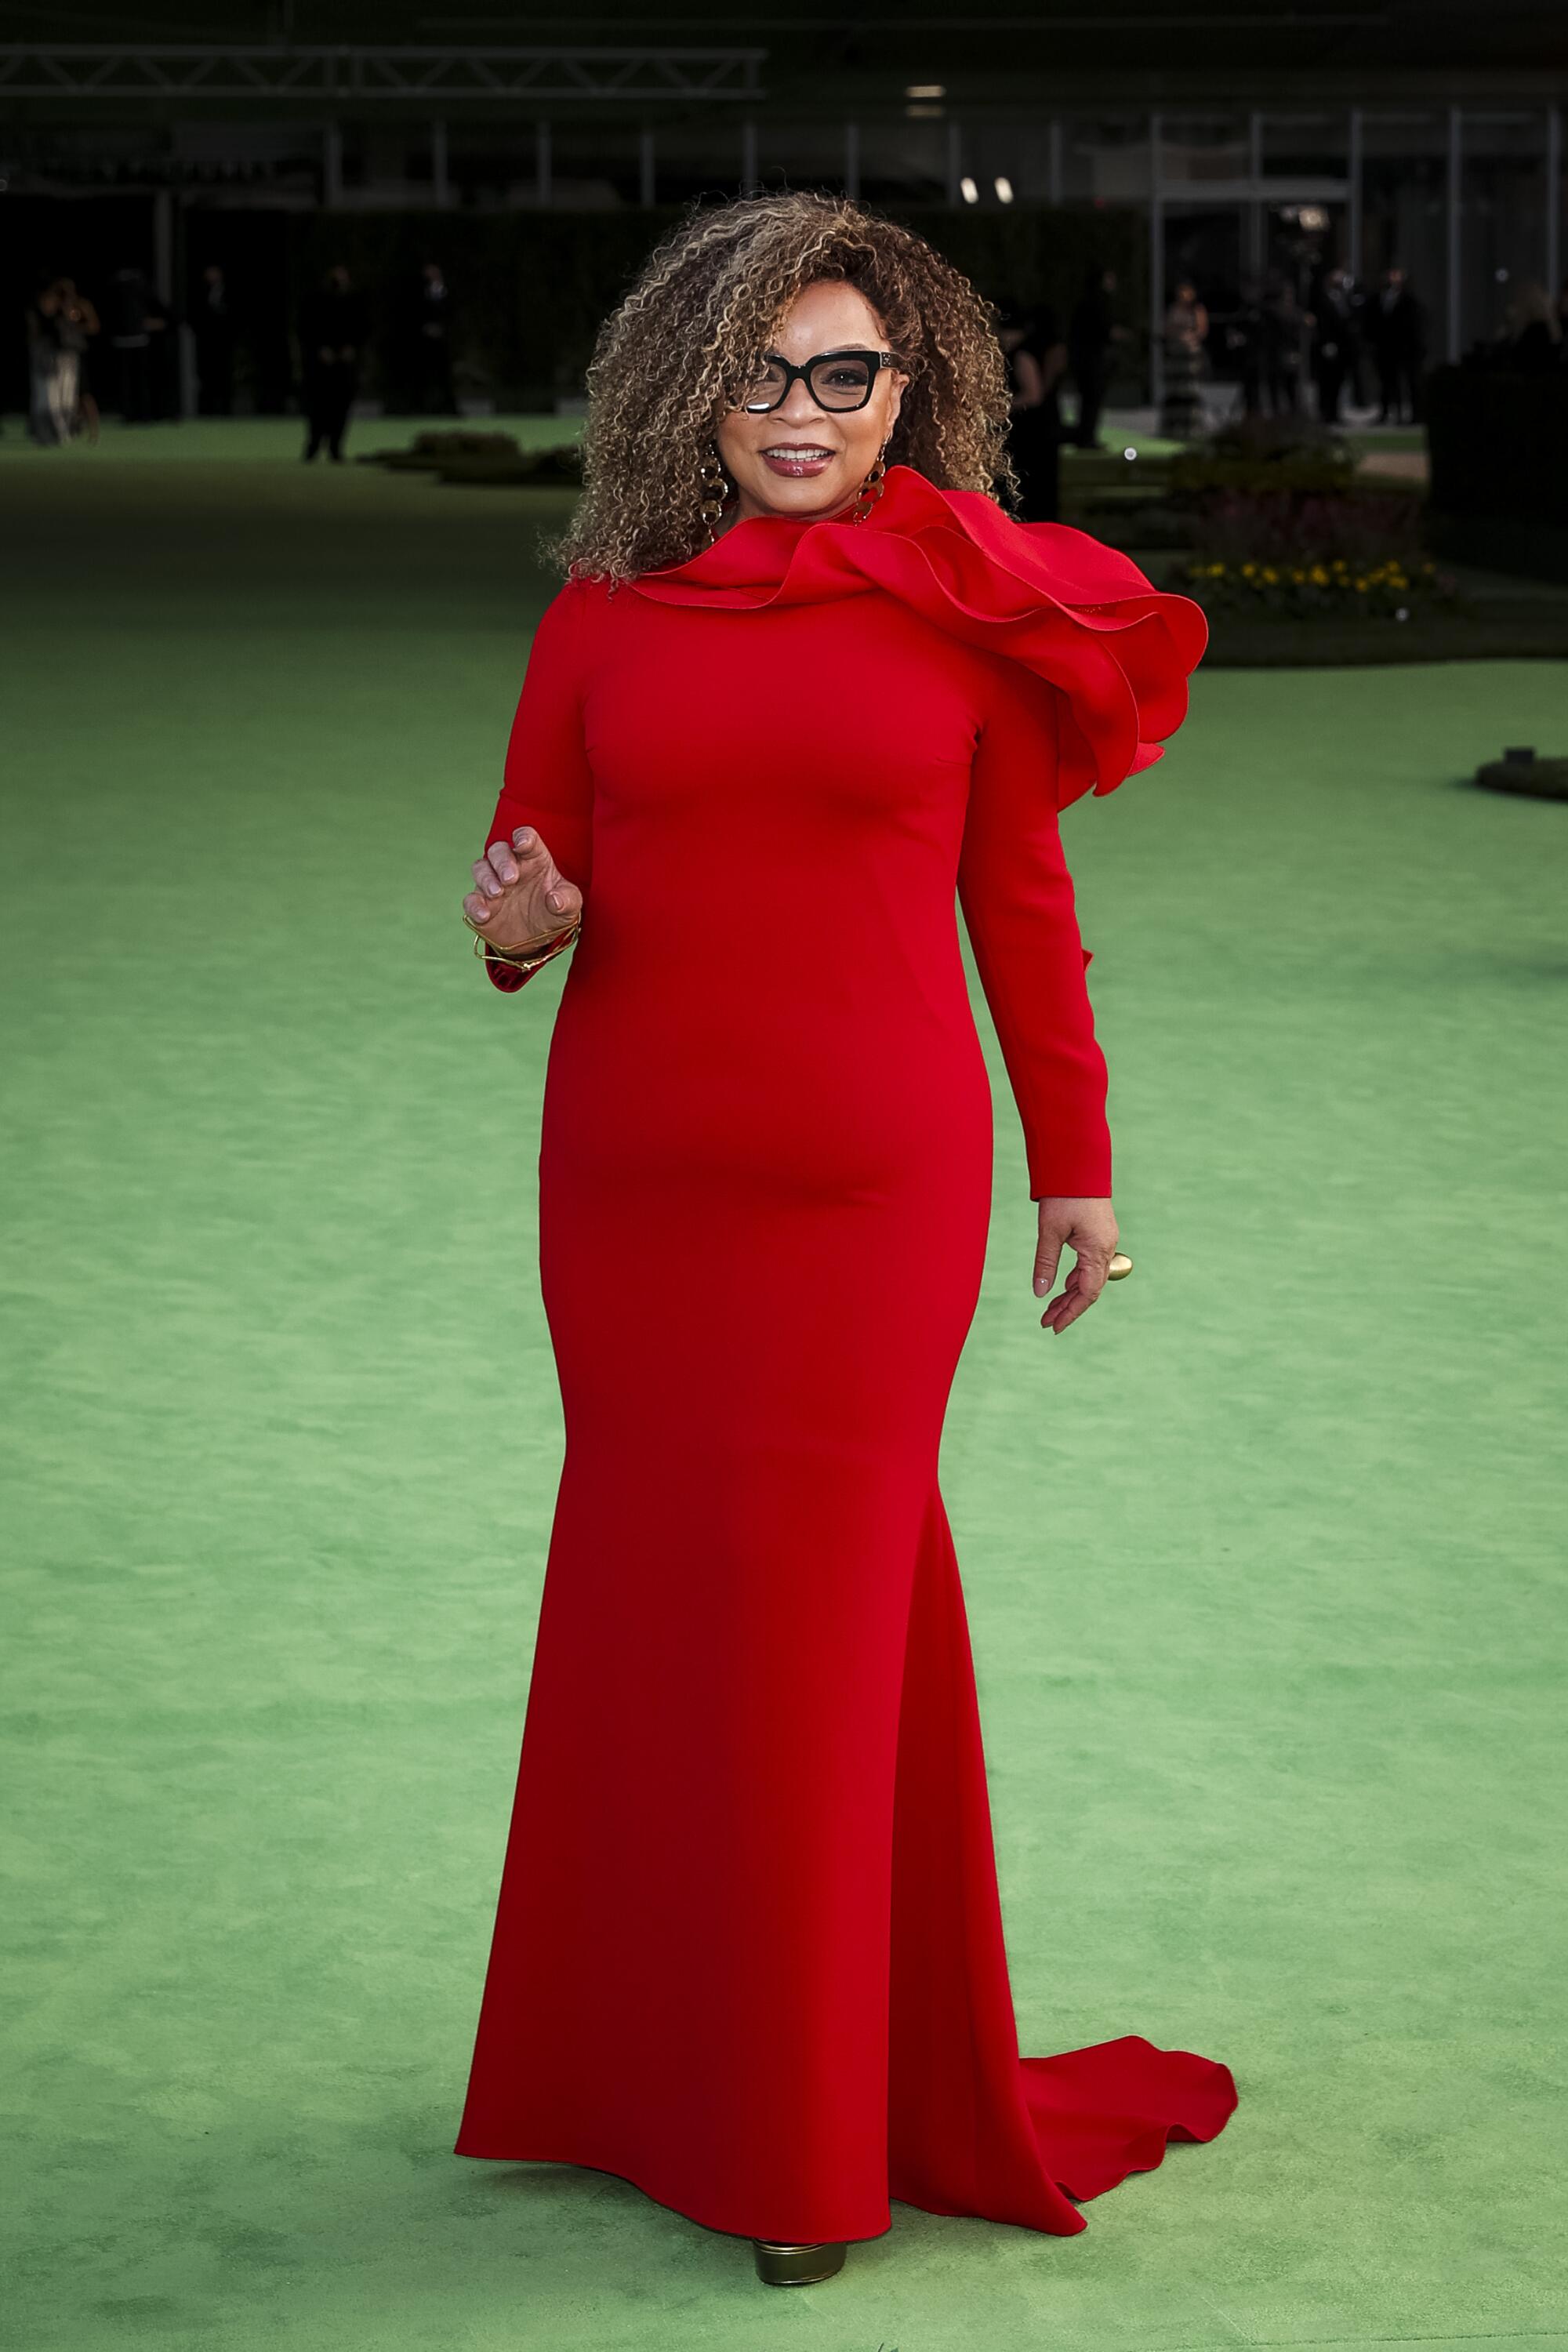 A woman in a red dress posing on a green carpet